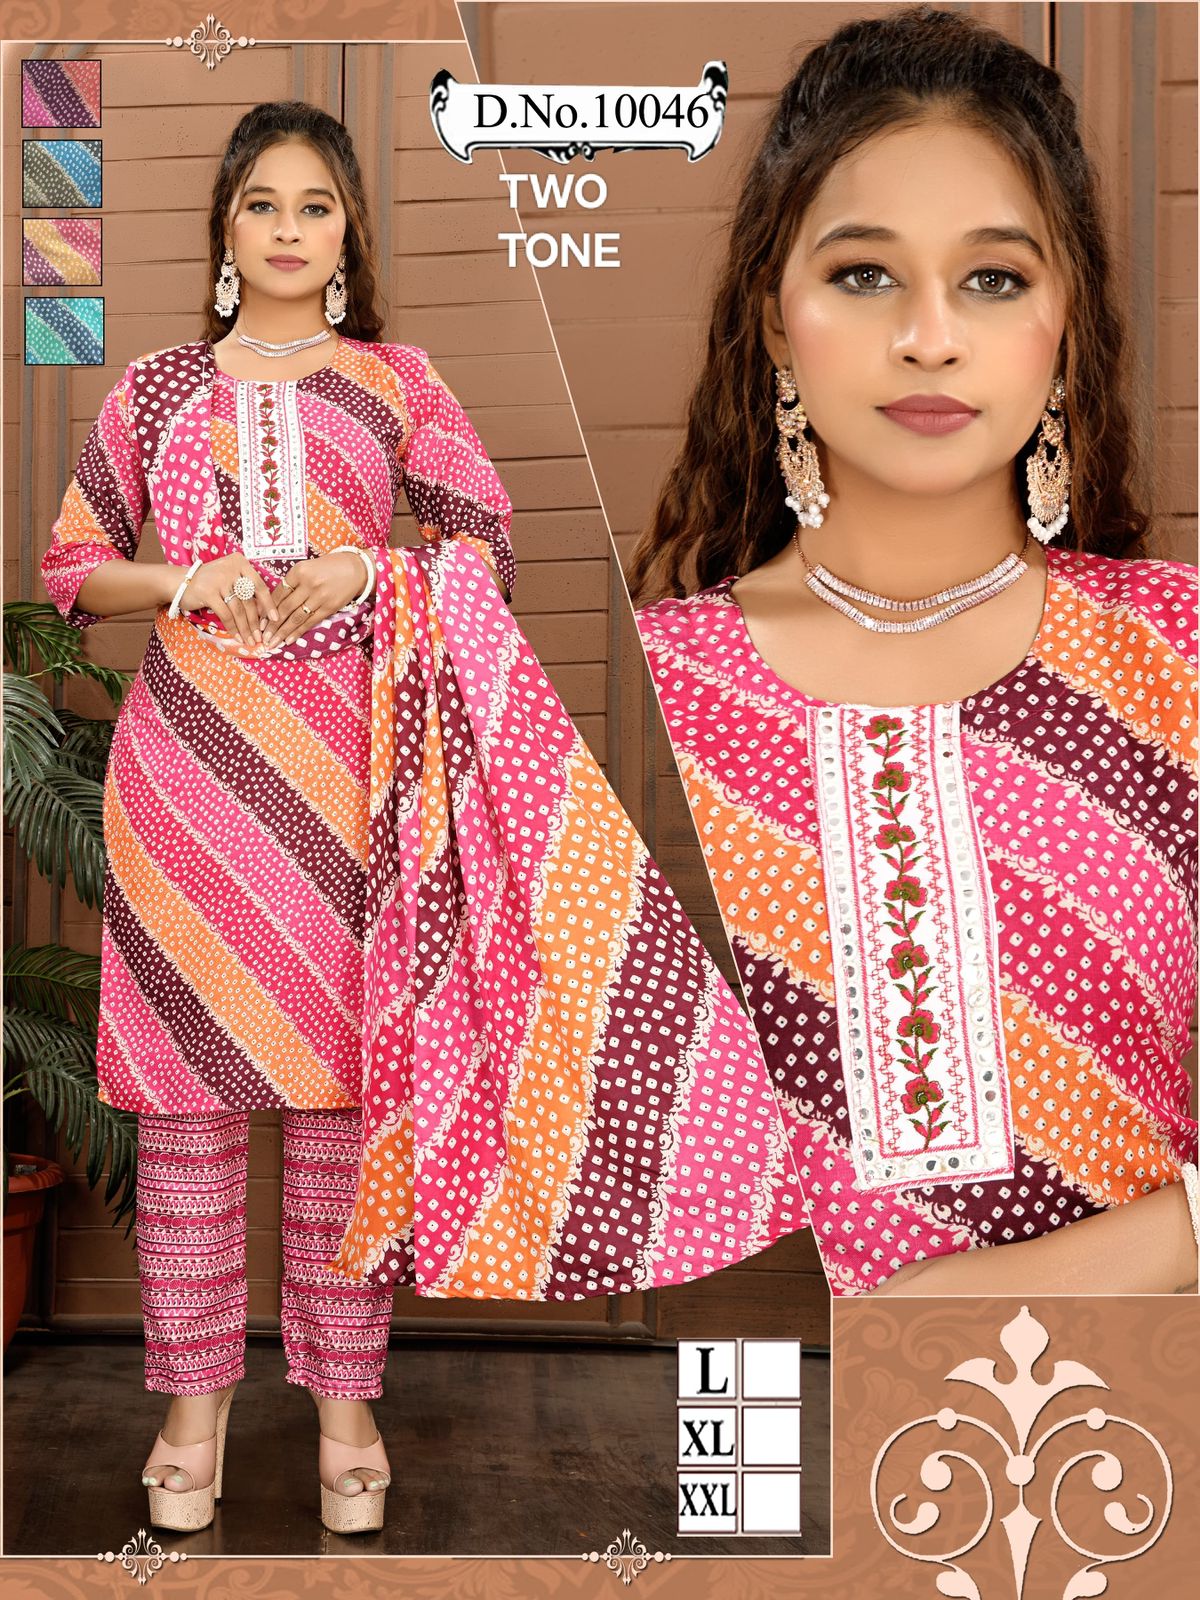 10045-10048 Mmc Two Tone Readymade Pant Style Suits Wholesaler Ahmedabad